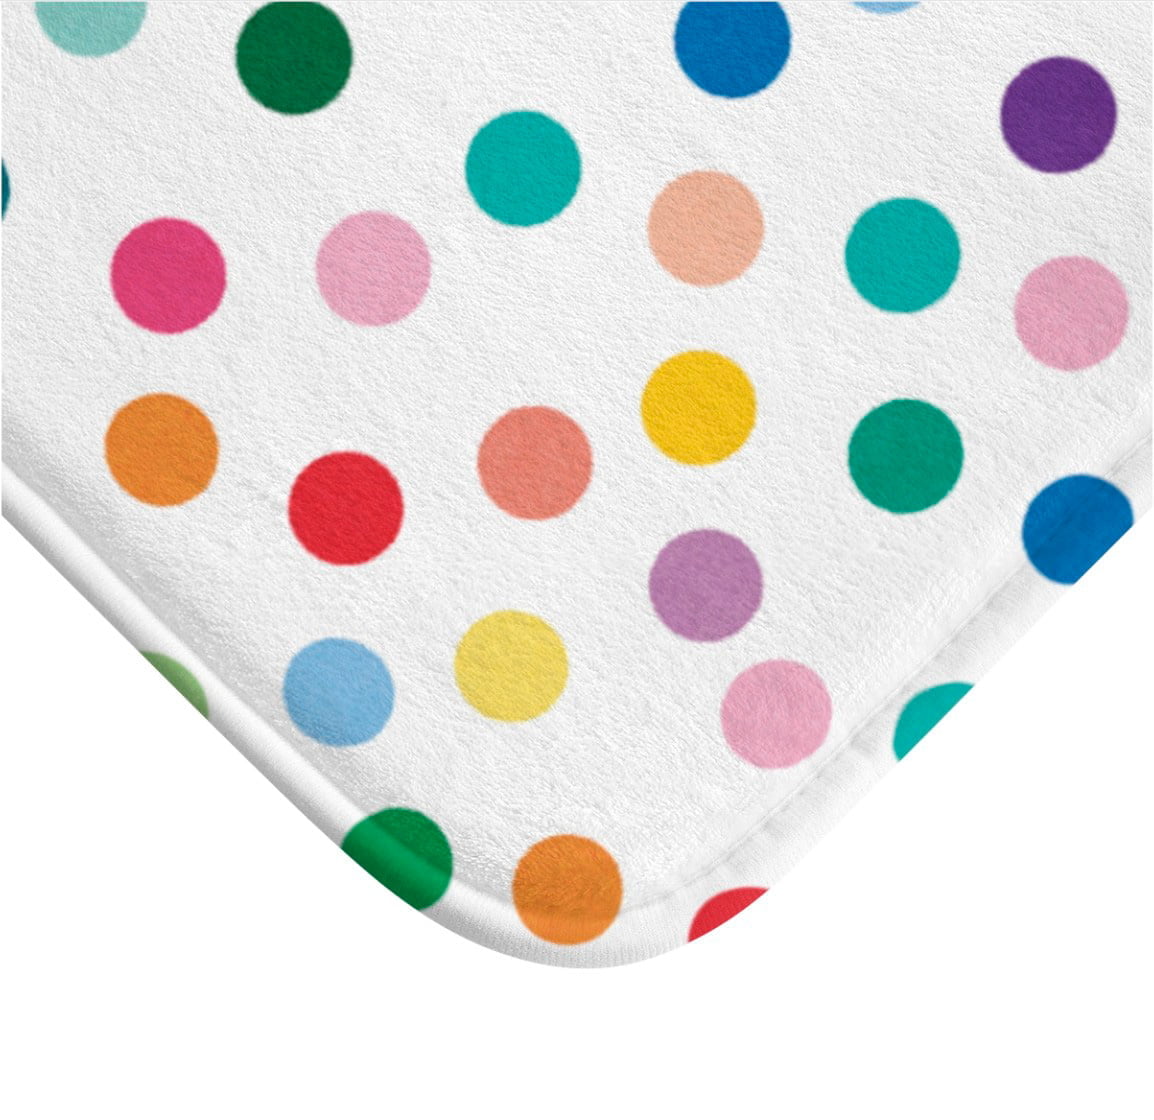 https://www.ozscapedesigns.com/wp-content/uploads/2022/12/kids-bath-mat-with-colorful-polka-dots-4.jpg